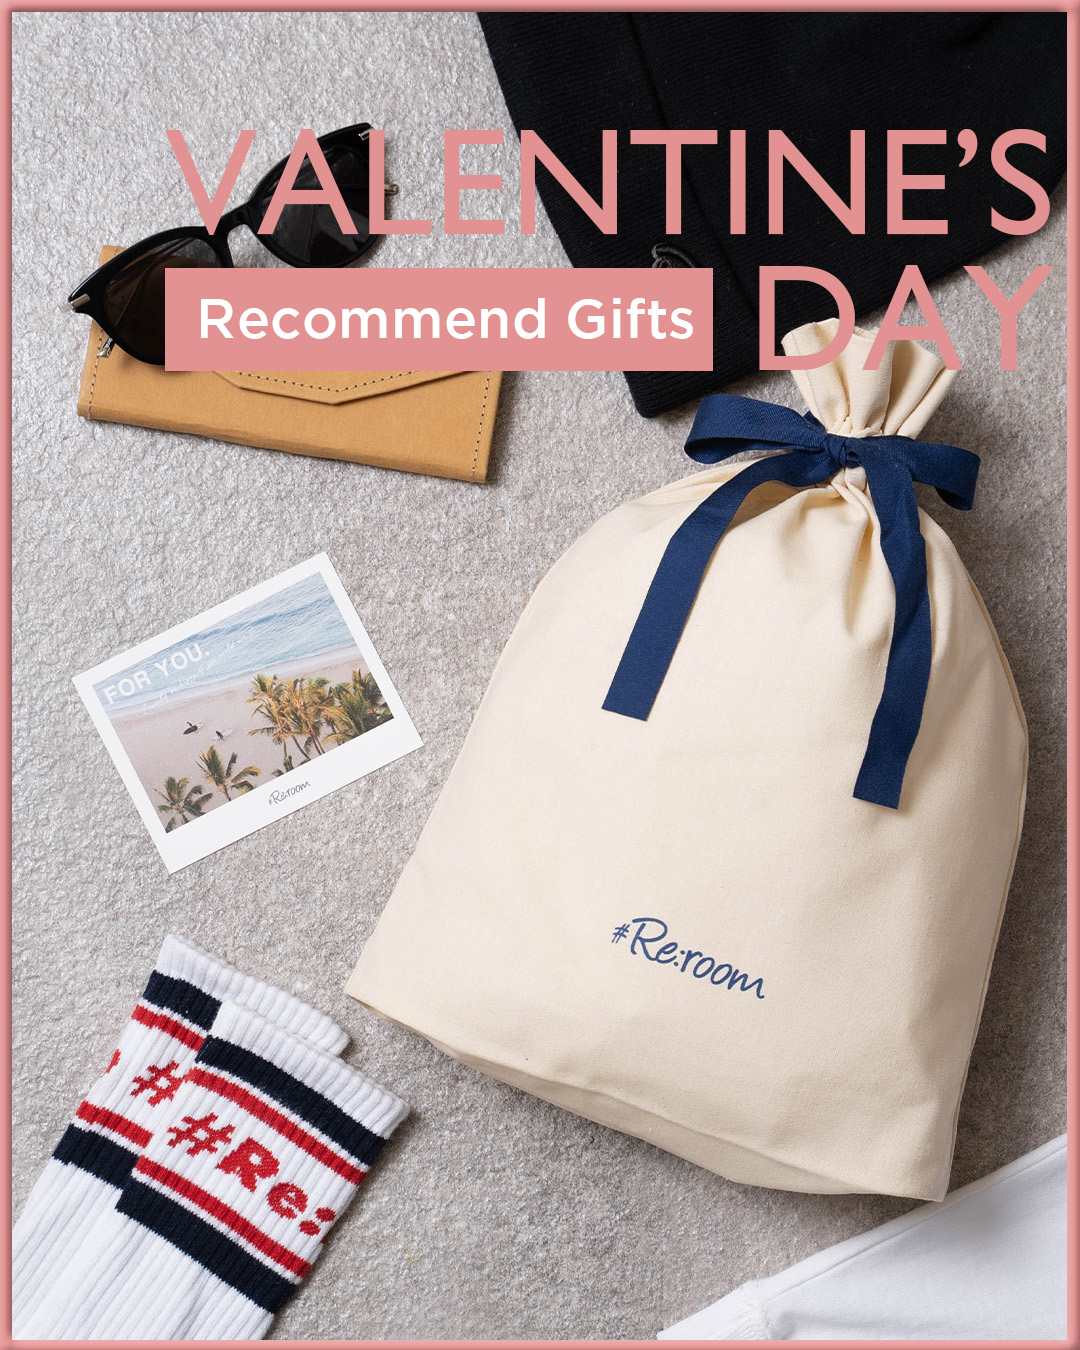 VALENTINE'S DAY RECOMMEND GIFTS